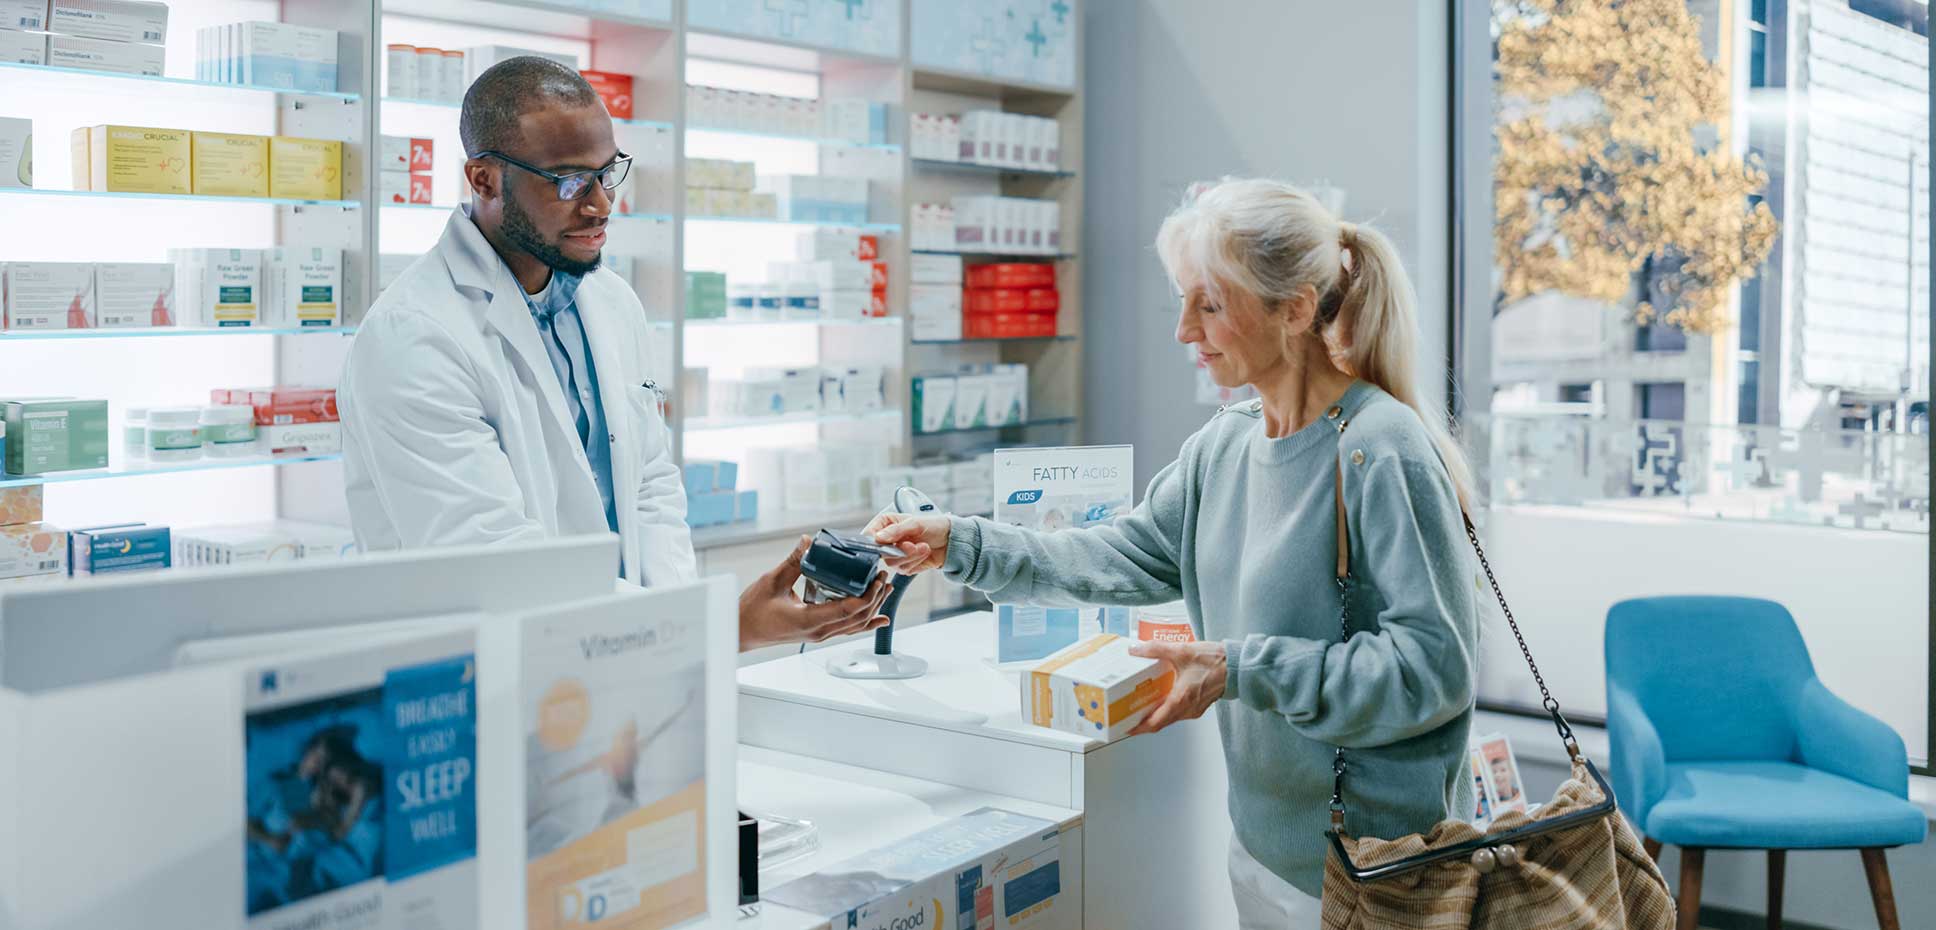 Woman paying for prescription at pharmacy counter